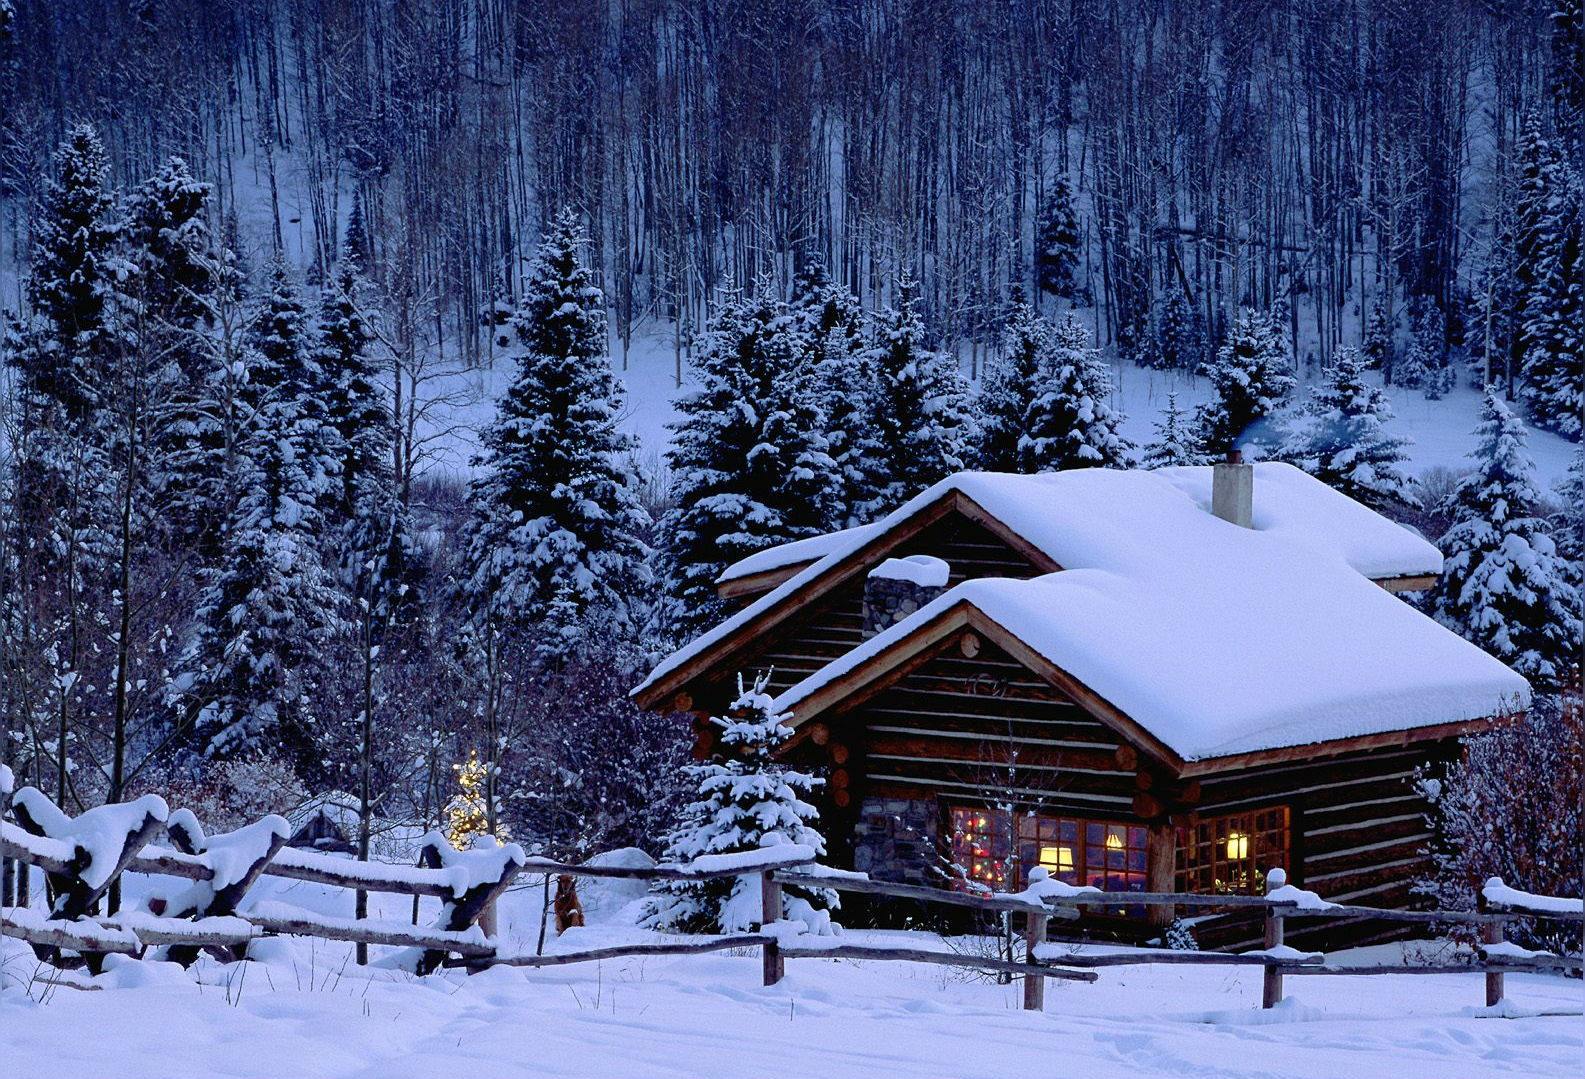 Kashmir Winter Wallpaper Which Is Under The Category